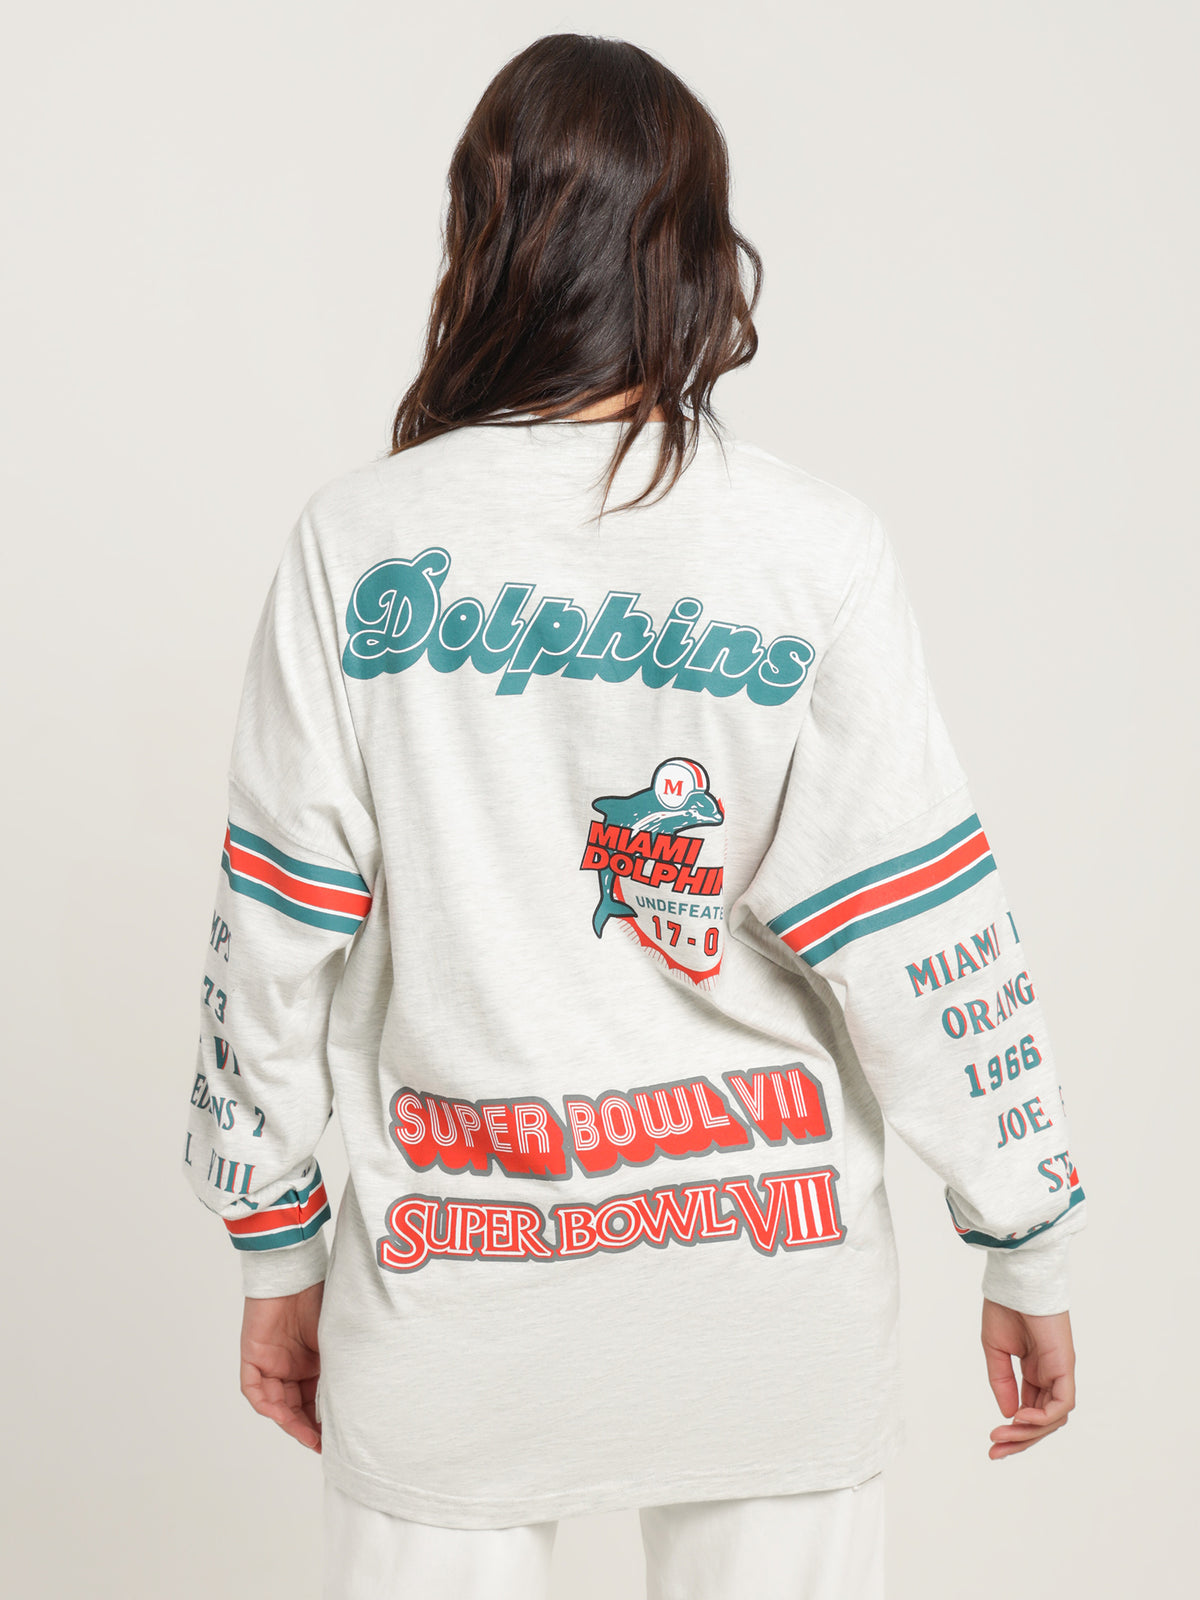 Dolphins 17 3/4 Long Sleeve Top in White Marle